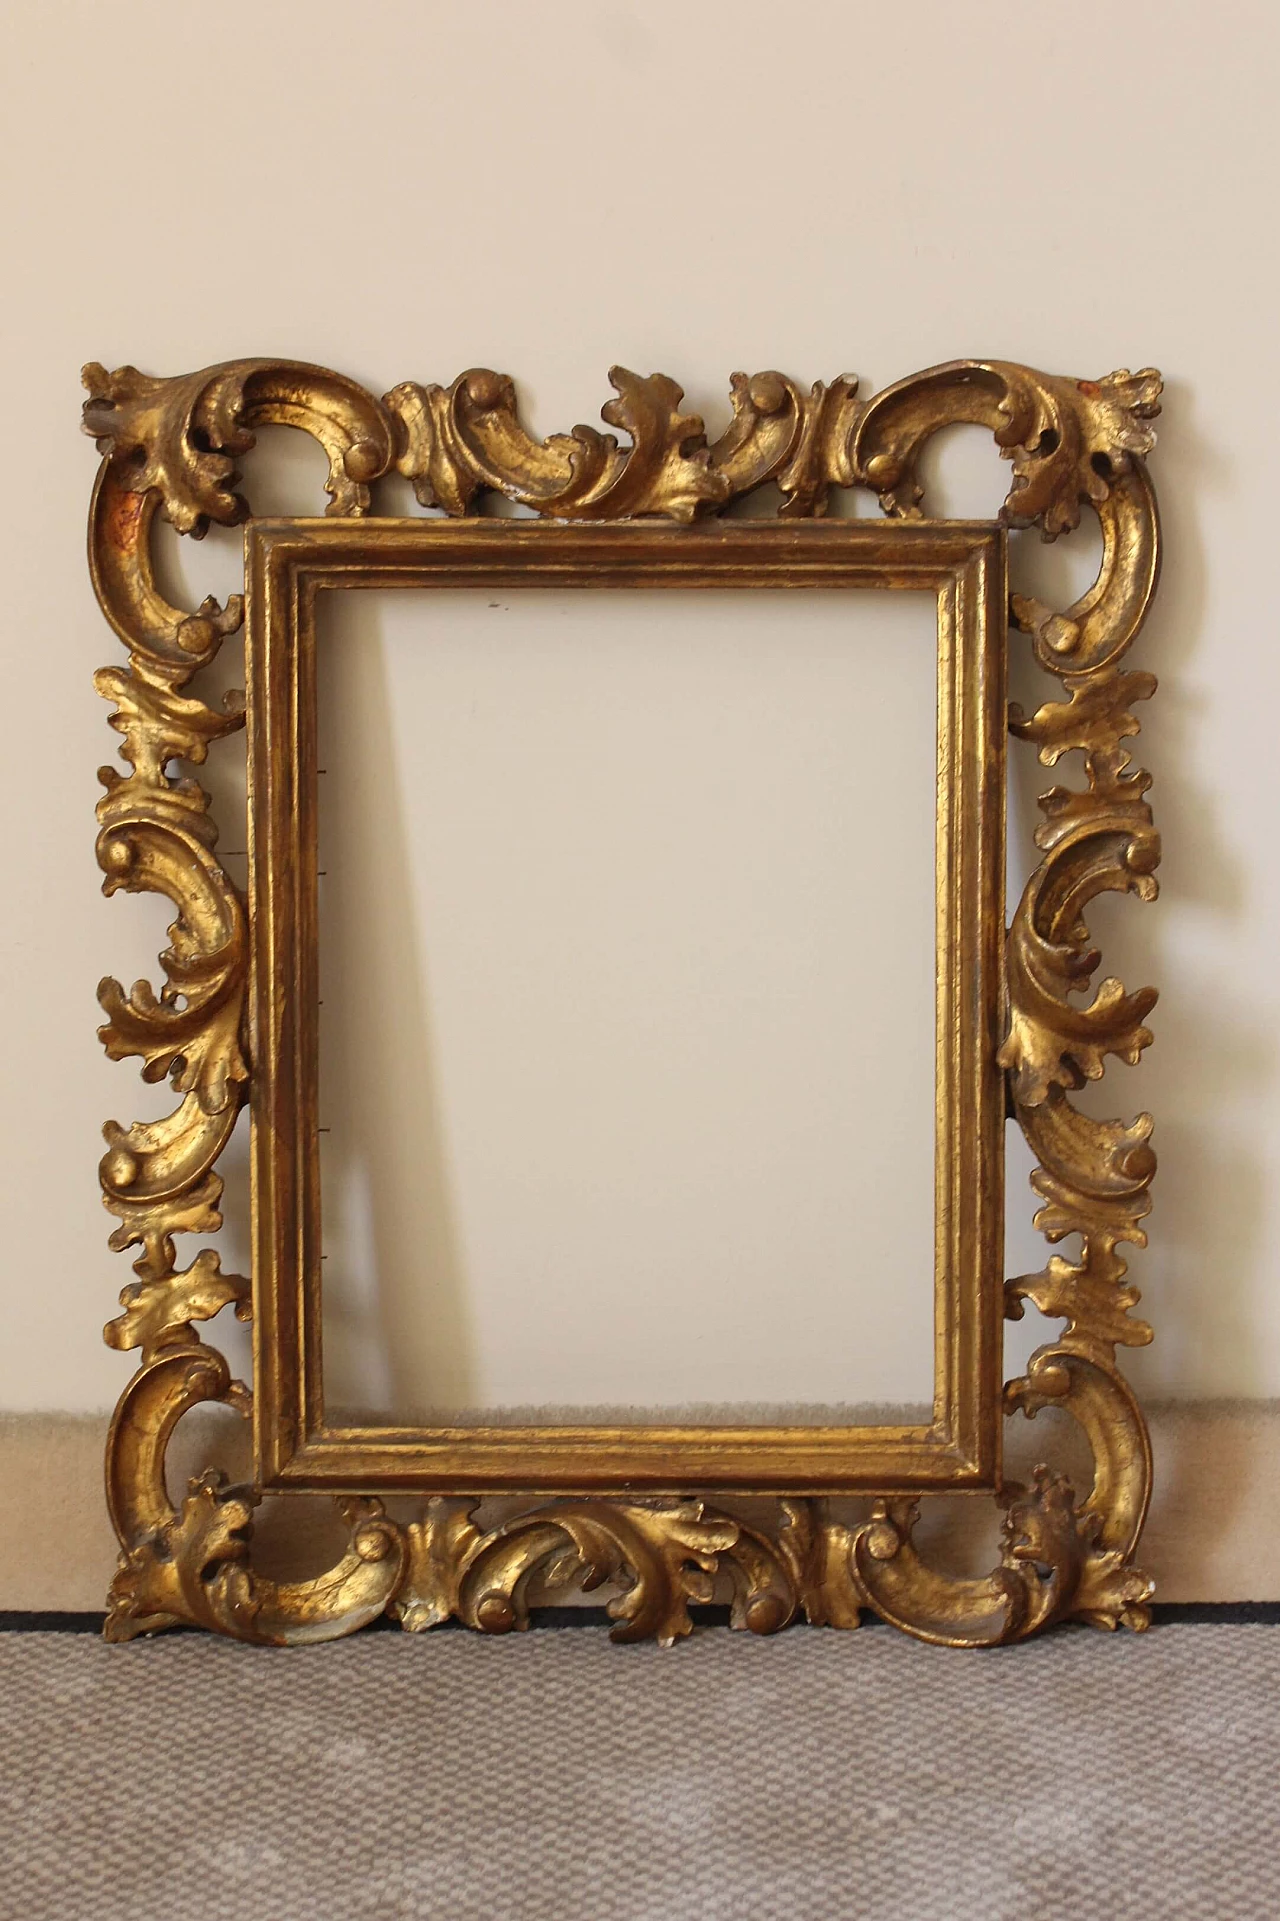 Wood and gilded plaster frame, 19th century 1223120